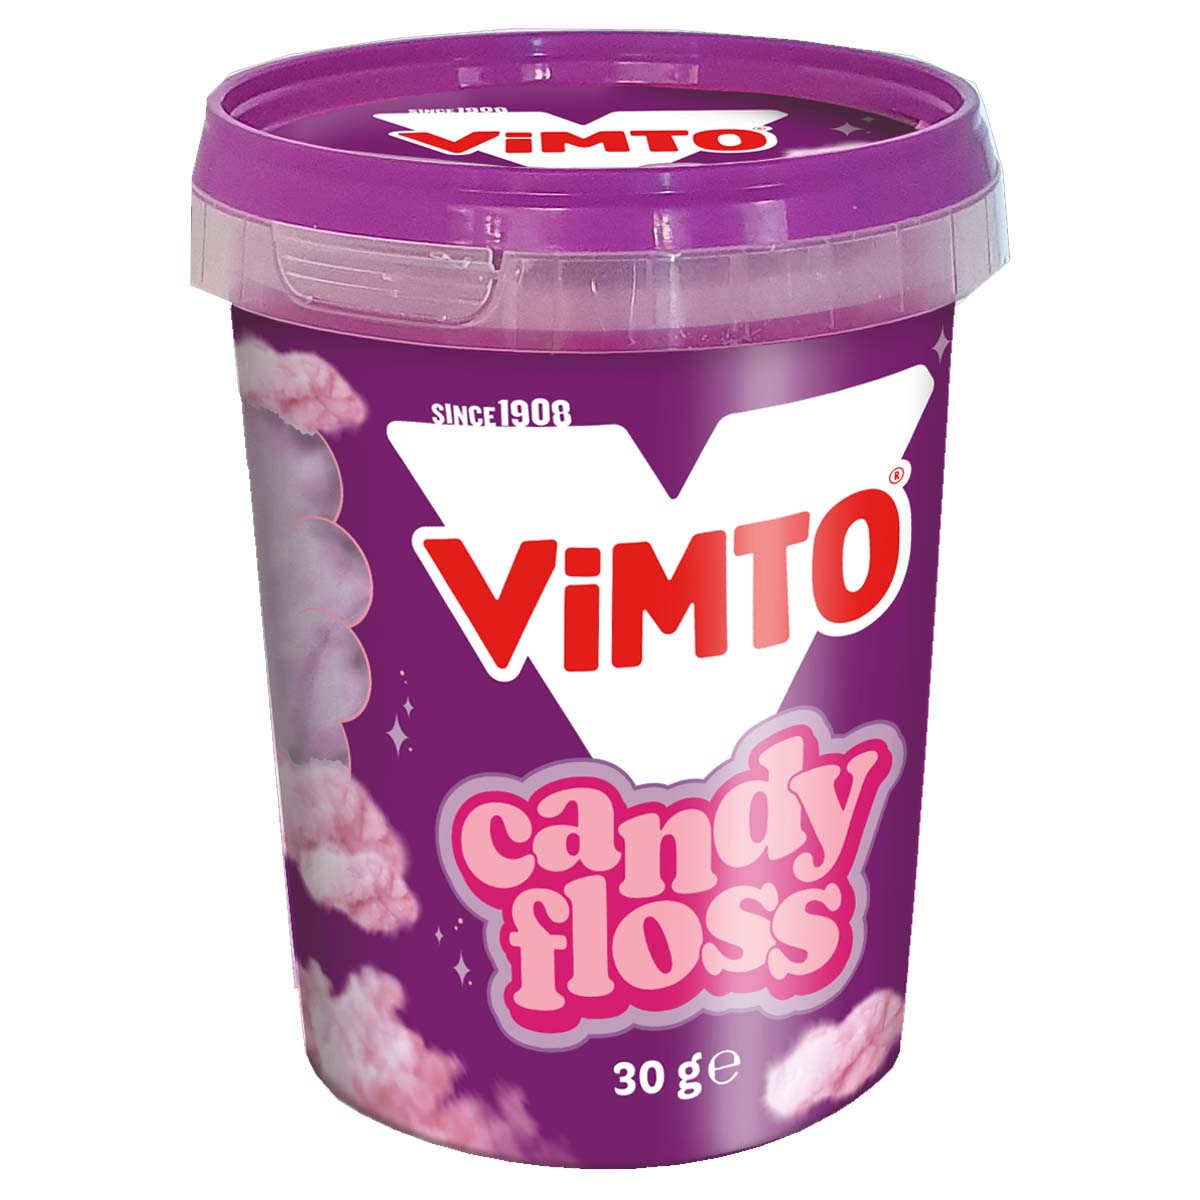 Vimto - Candy Floss - 30g - Continental Food Store